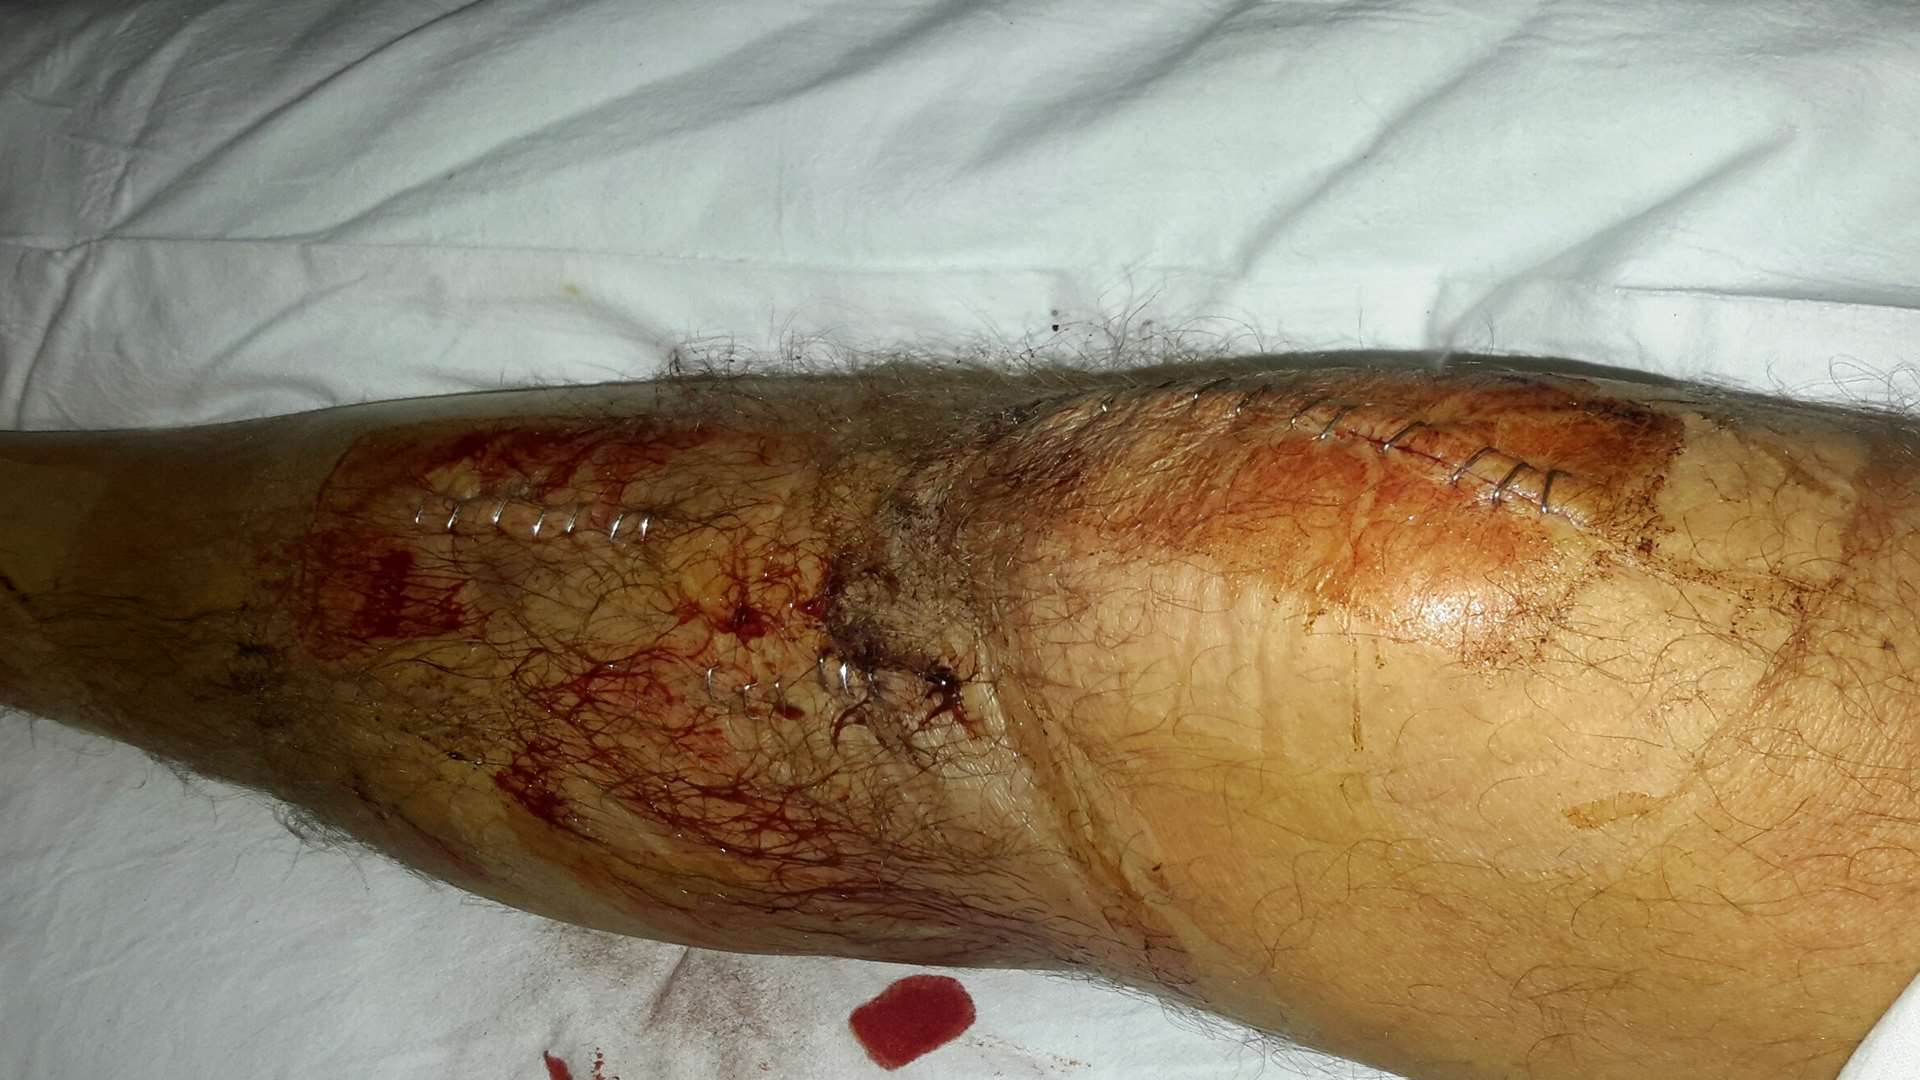 Mr Lawrence's leg after the incident